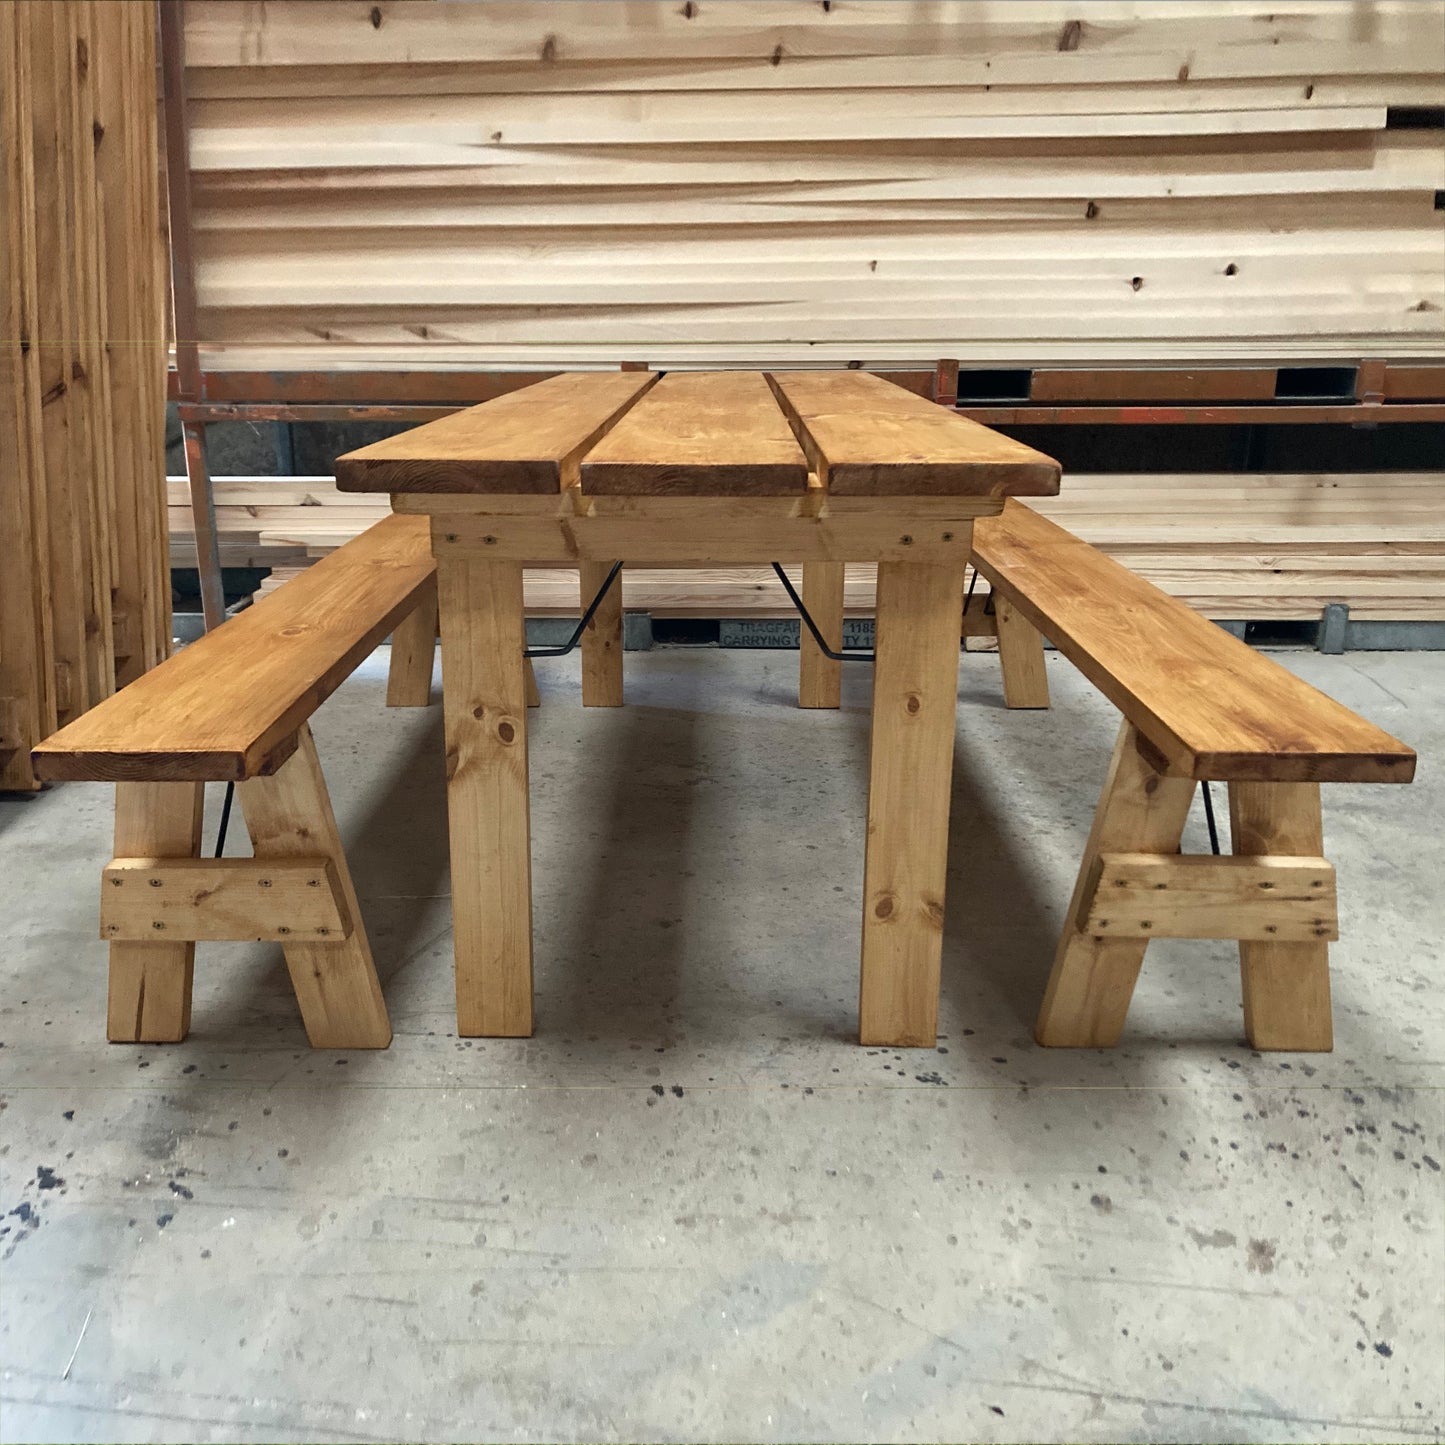 3. Outdoor Folding Rustic-style Bench